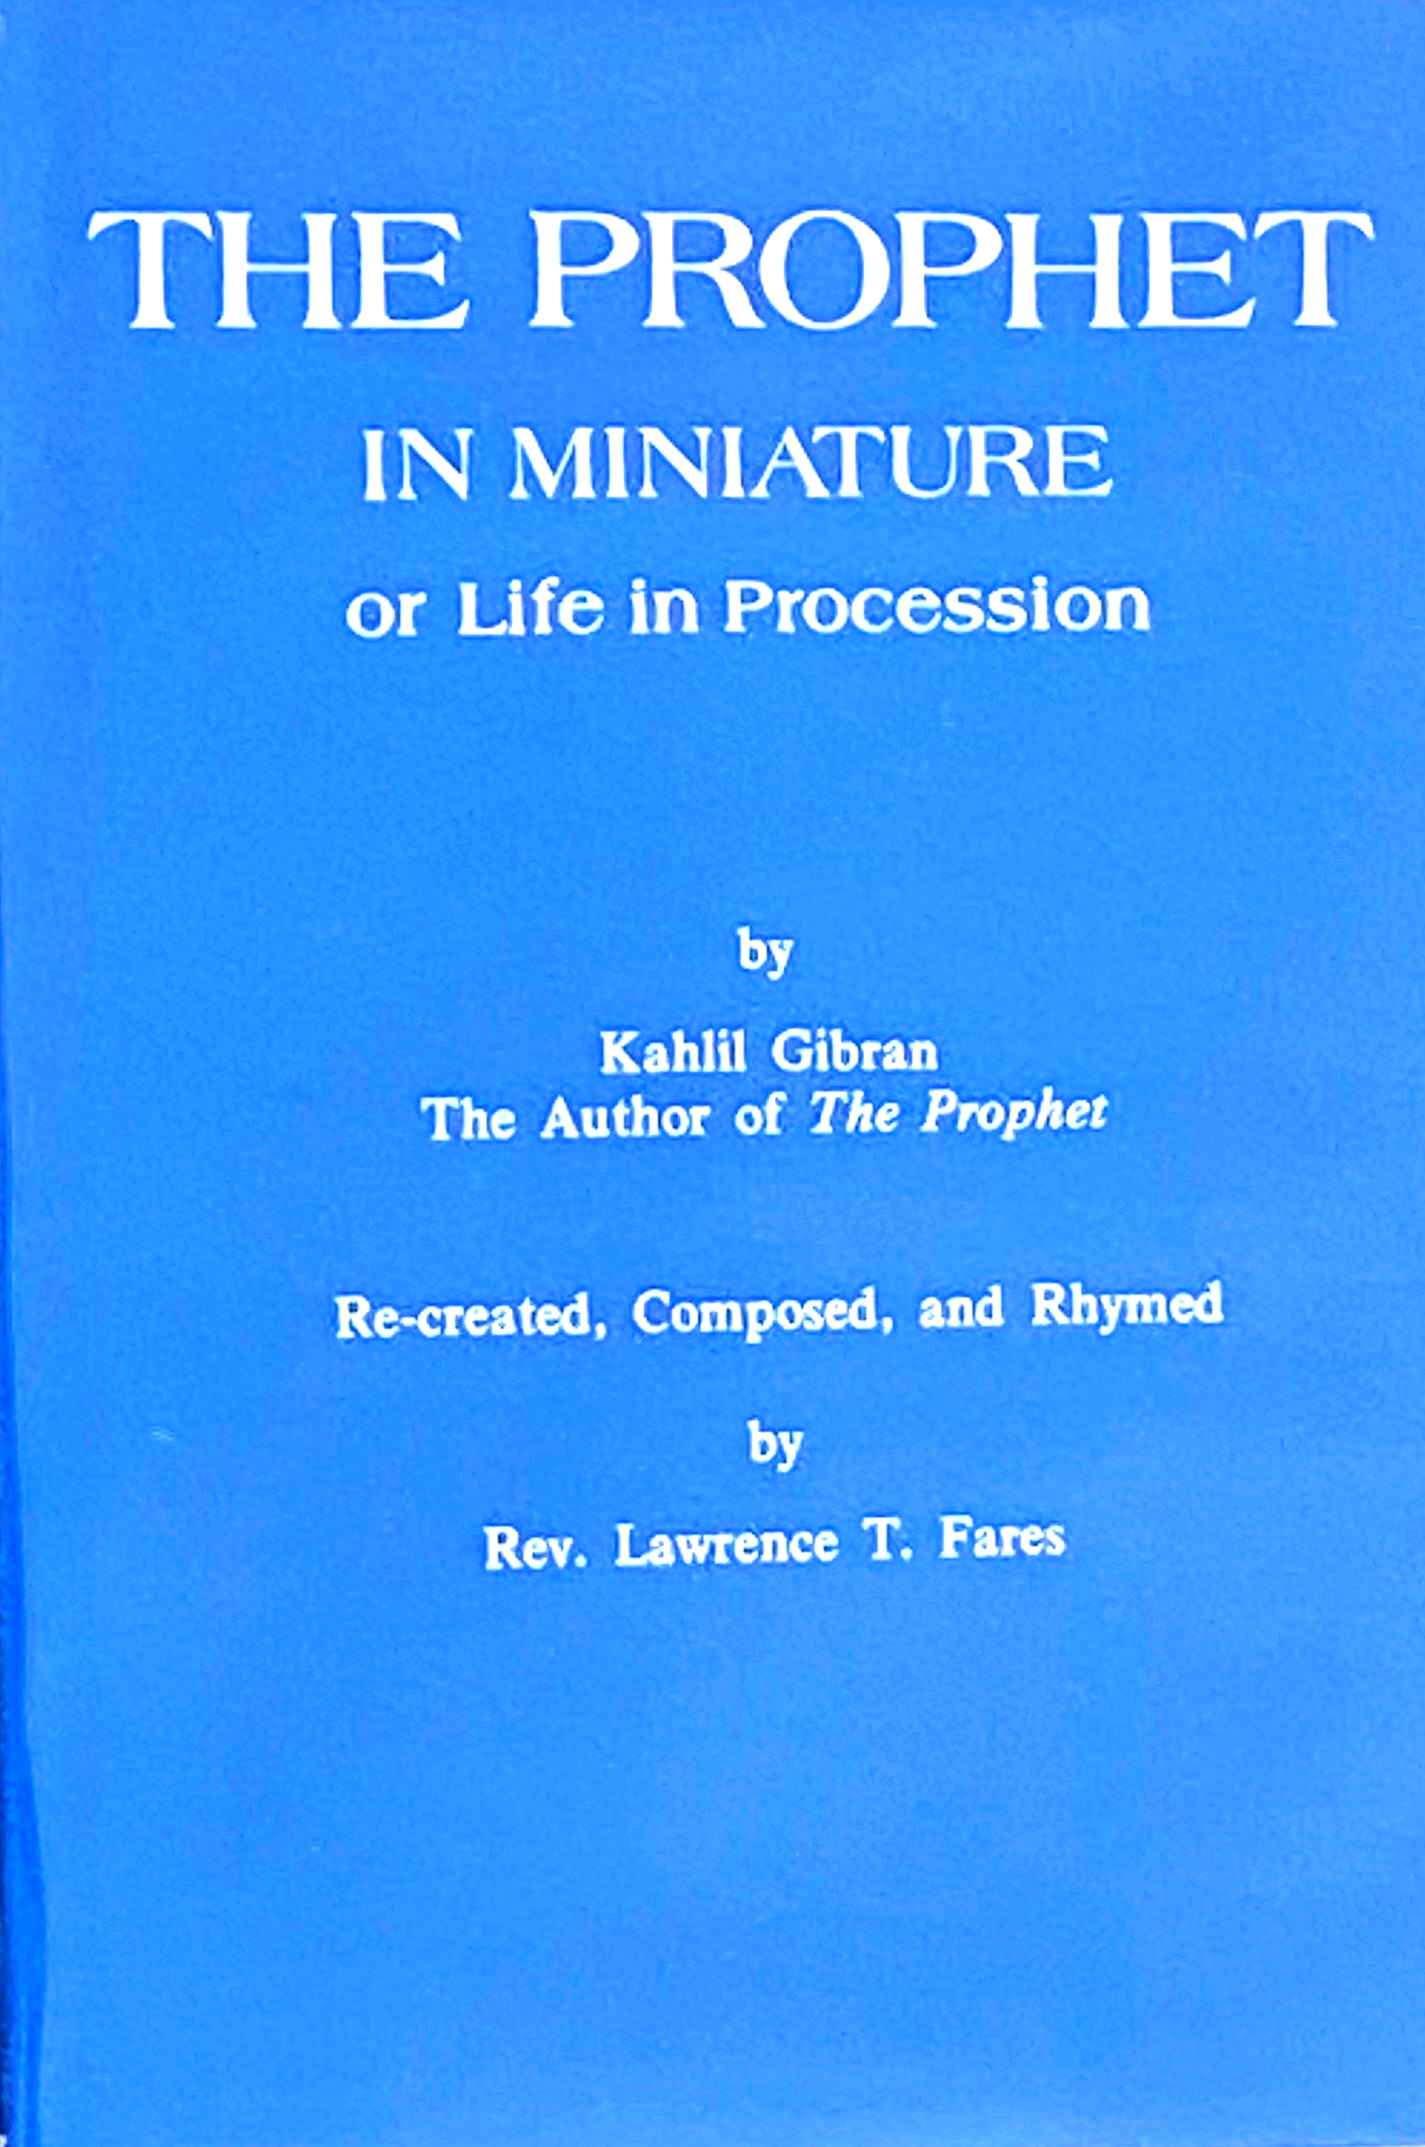 The Prophet in Miniature, or Life in Procession, by Rev Lawrence T. Fares published by Dorrance & Co Philadelphia in 1973